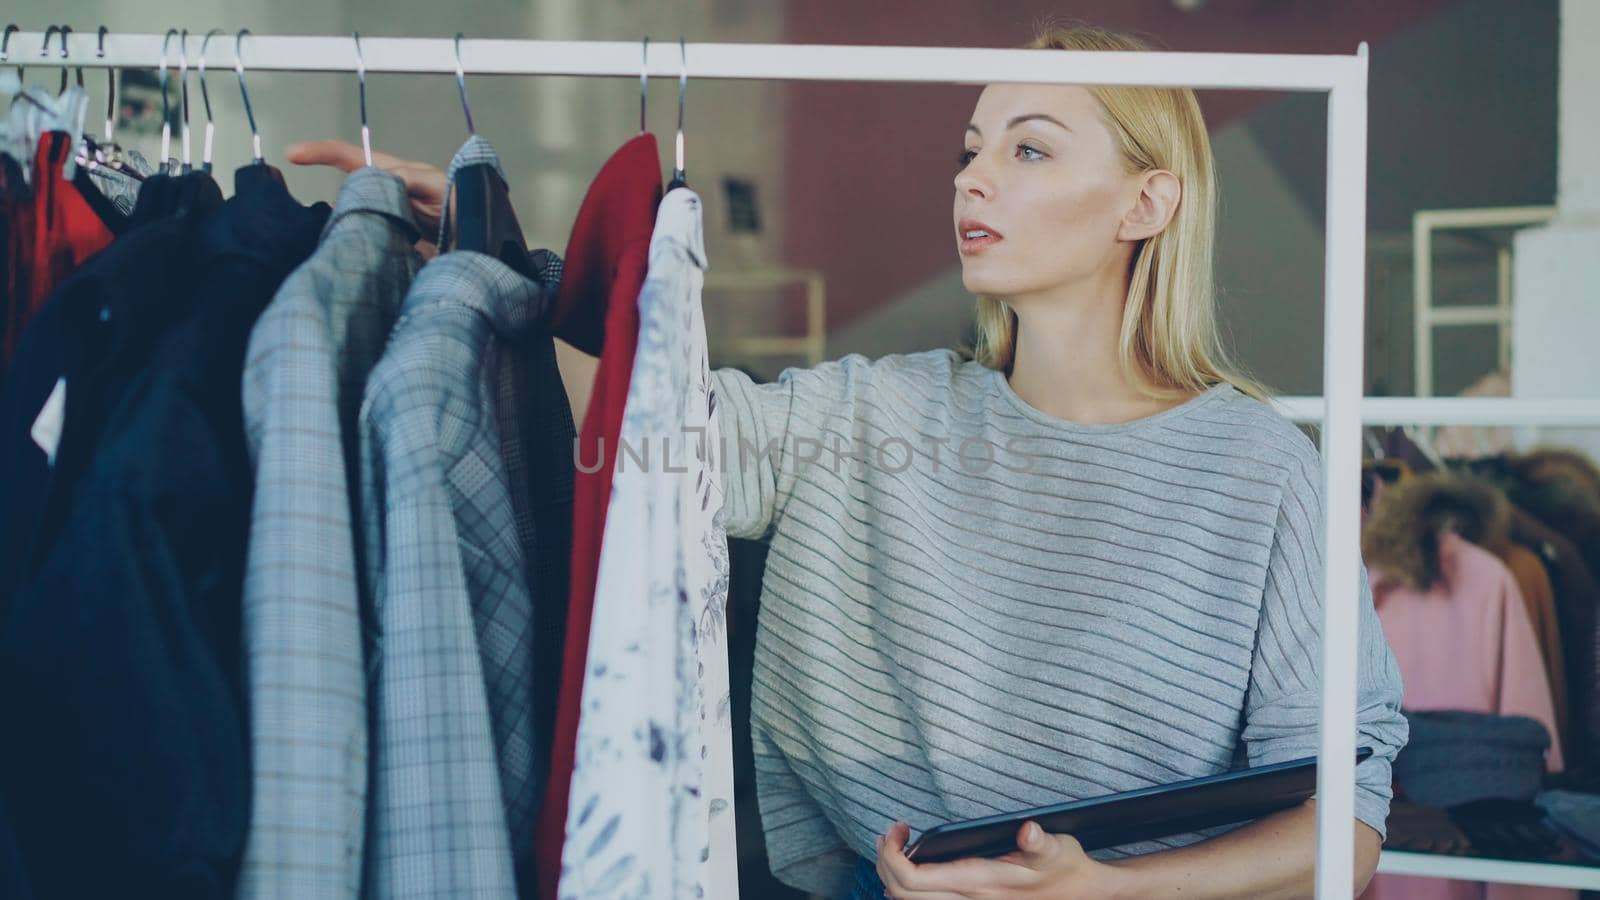 Owner of clothing store is checking and counting garments on rails while working with tablet. She is inputting information about her goods. Small business concept. by silverkblack